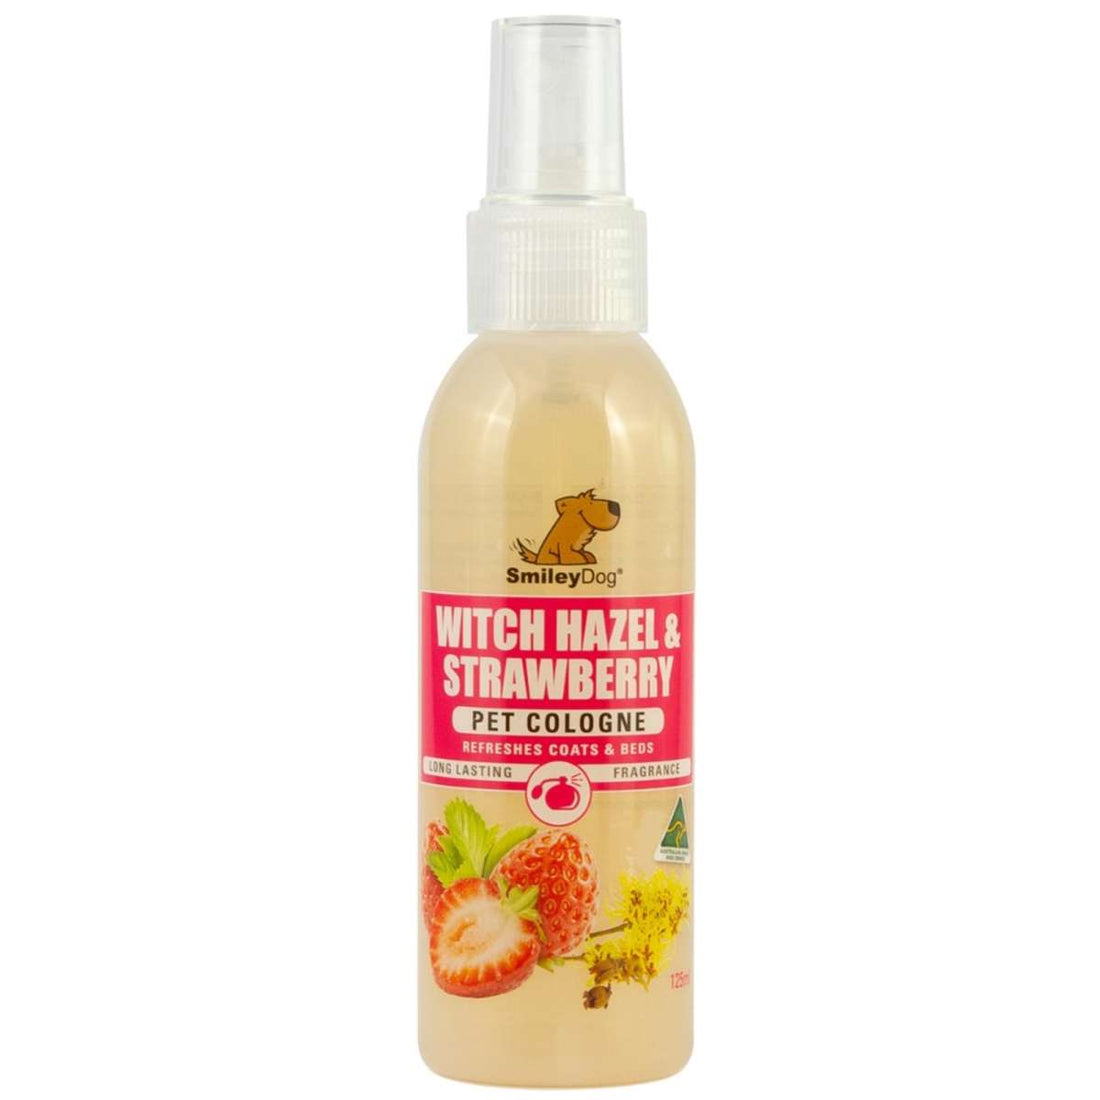 Smiley Dog Witch Hazel and Strawberry Pet Cologne 125 ml